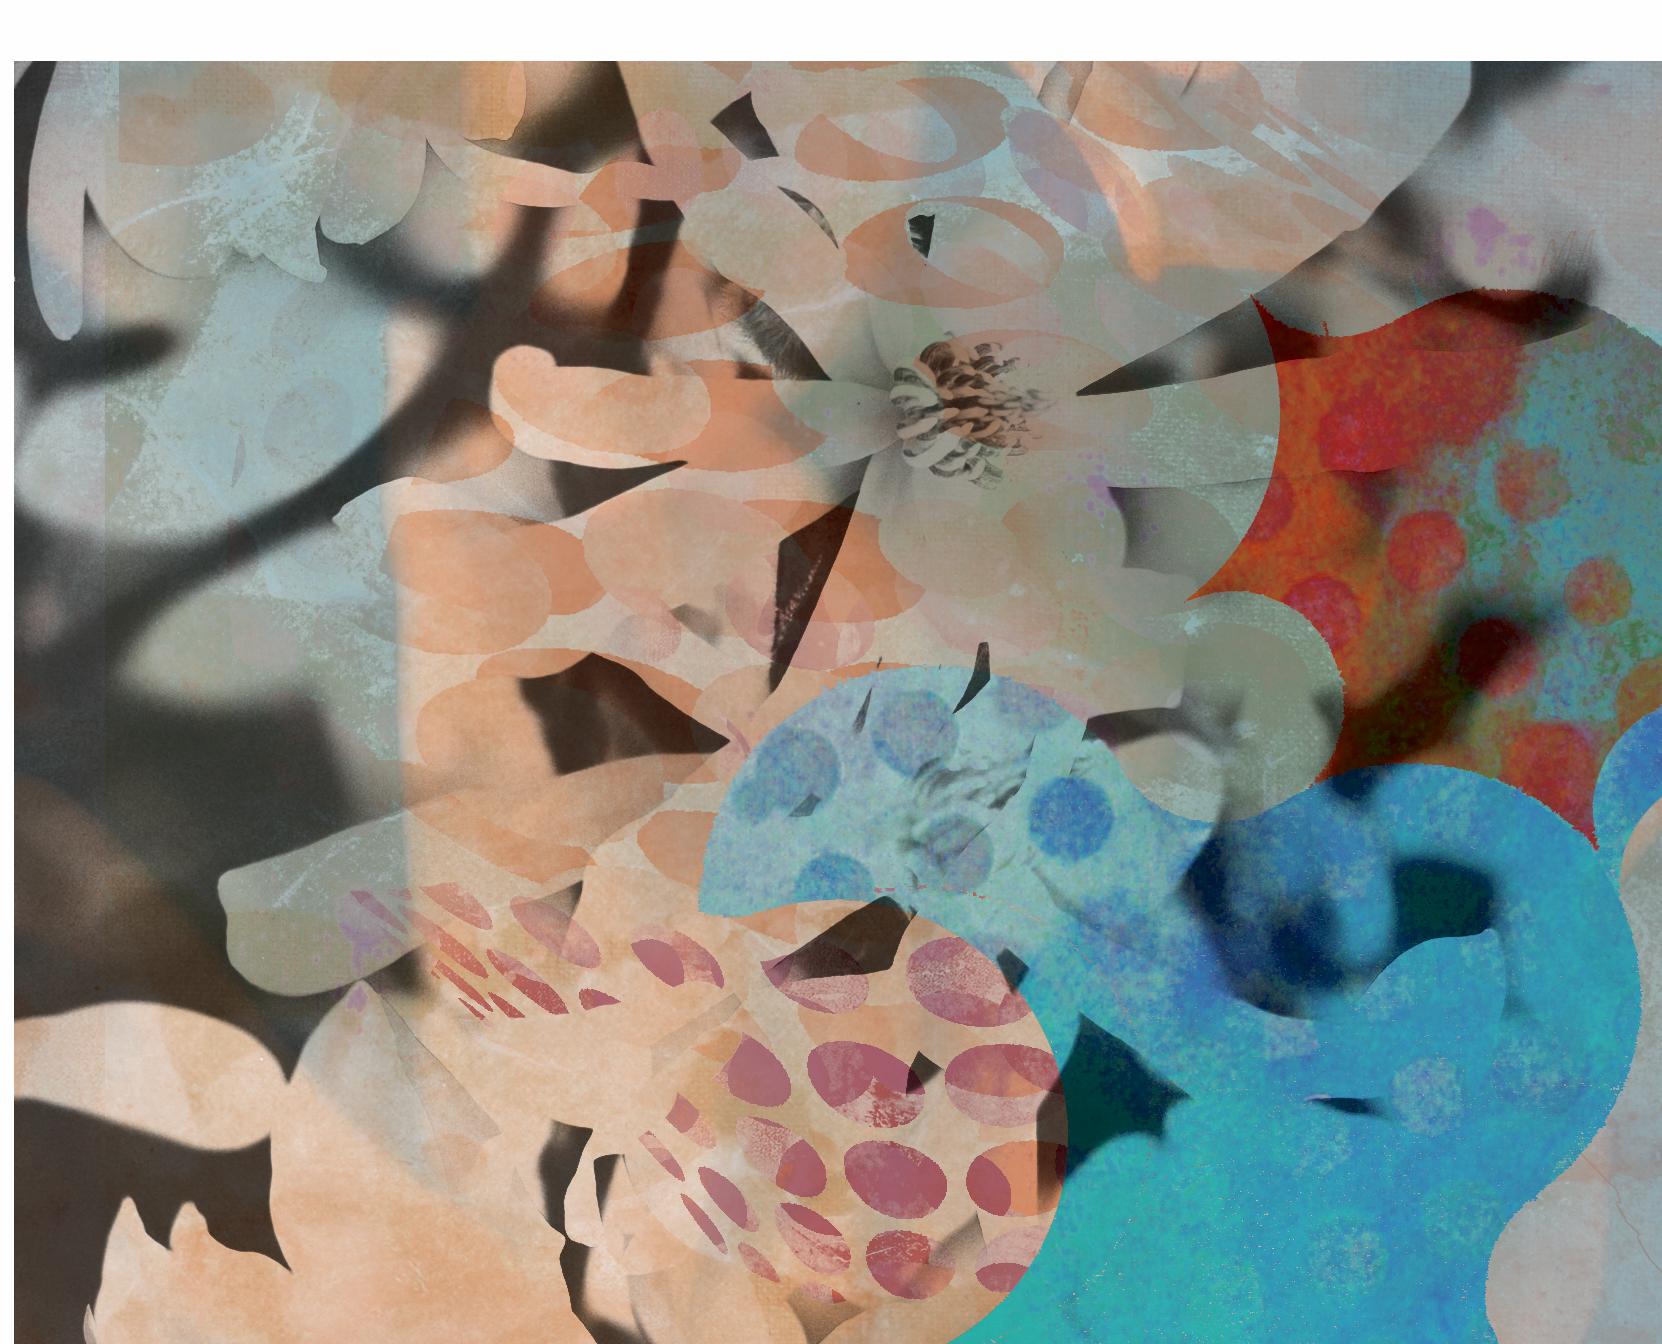 Flowers VII, 2019
Edition of 25

Digital pigment print Ultrachrome ink on Fabriano Rosaspina paper. Hand signed by the artist, and certificate of authenticity,  (Unframed)

His work has been shown in Reina Sofía Museum of Madrid, Royal Academy of